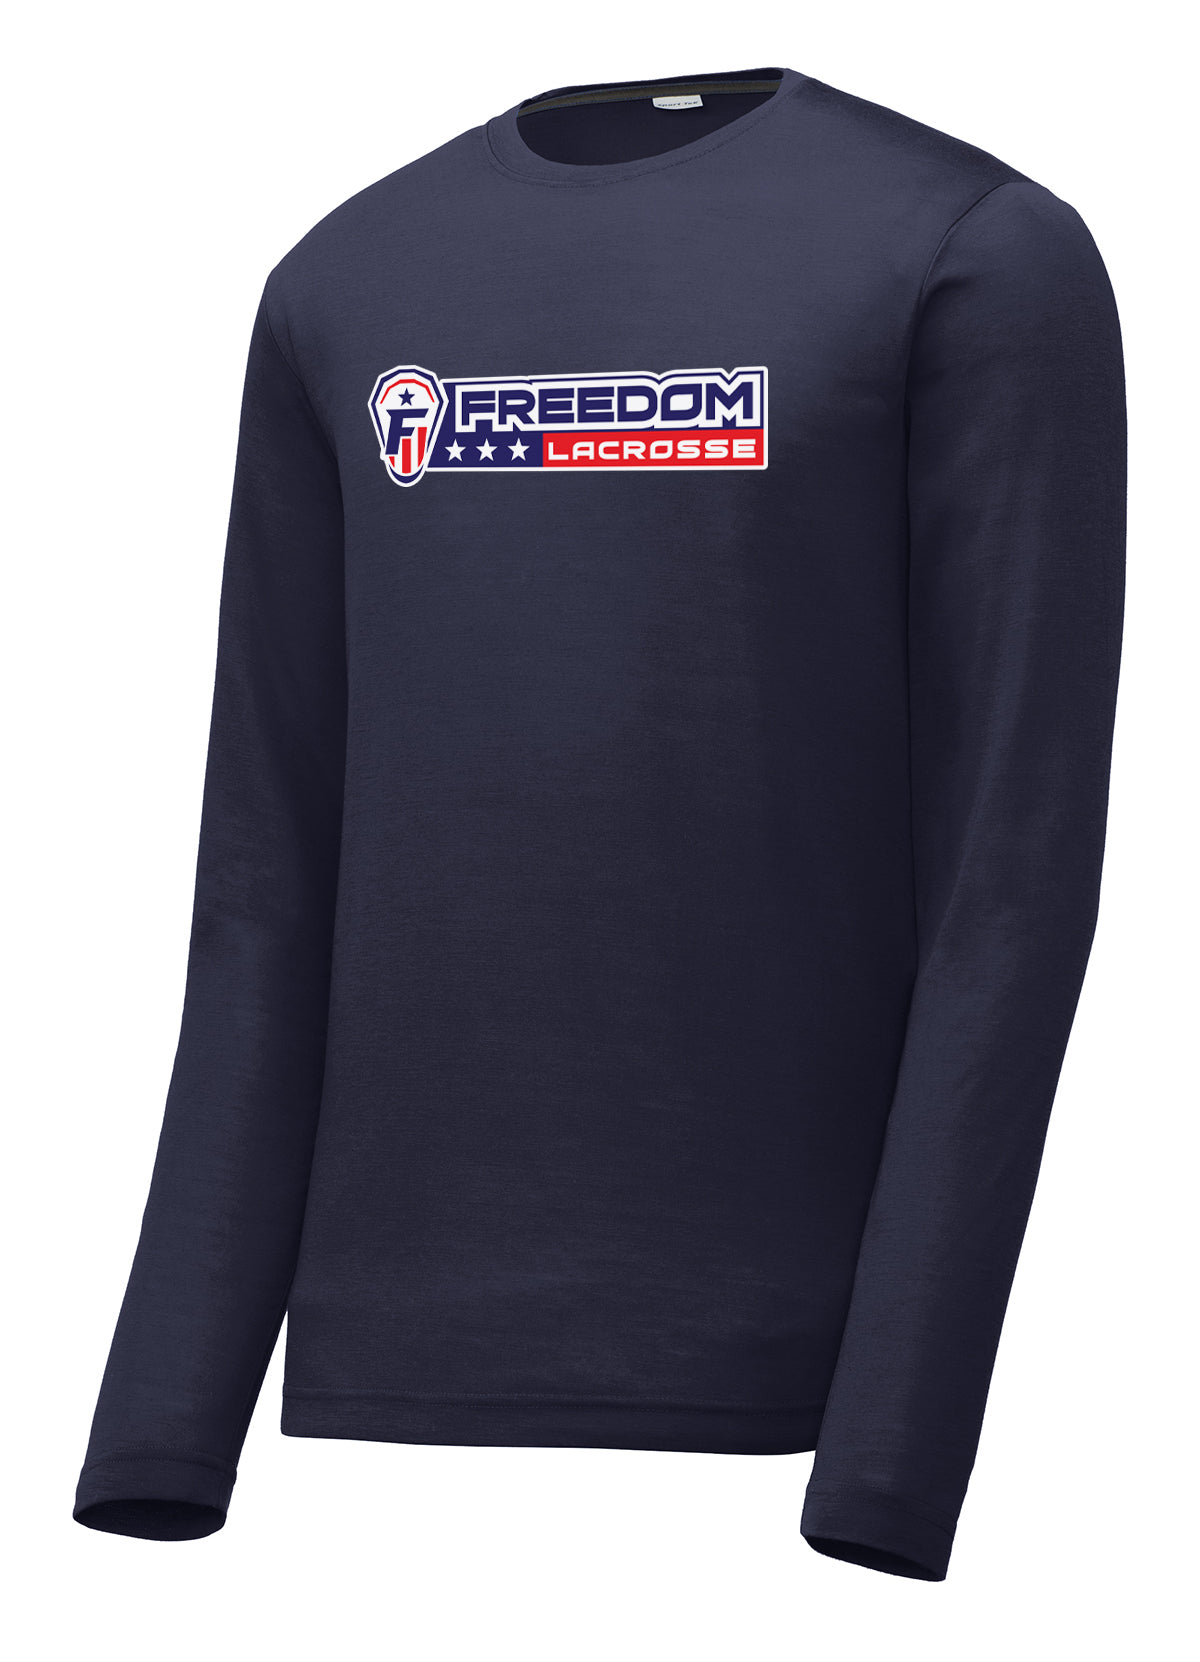 Freedom Lacrosse Navy Long Sleeve CottonTouch Performance Shirt